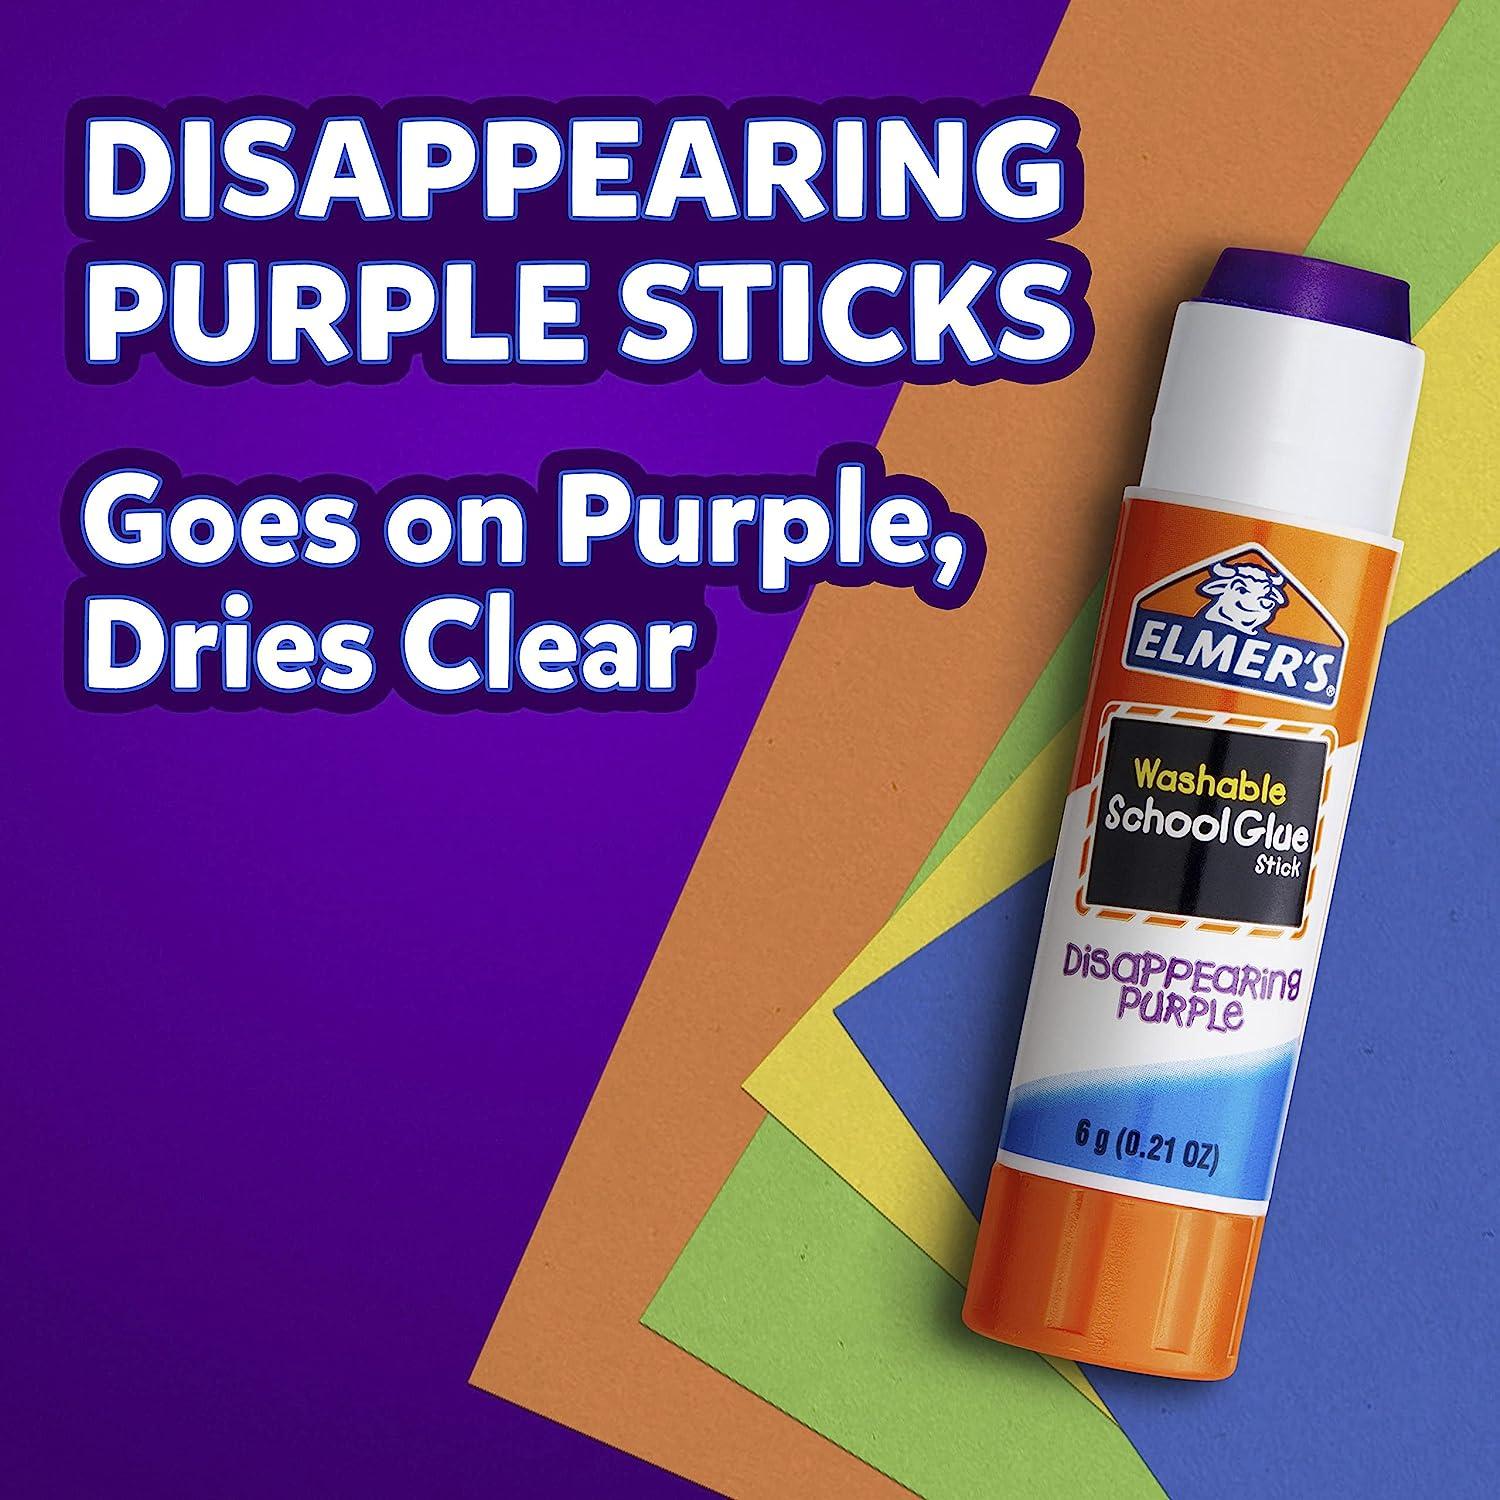  Elmers Disappearing Purple Washable Glue Bundle - School Glue  Sticks and Bottles : Arts, Crafts & Sewing